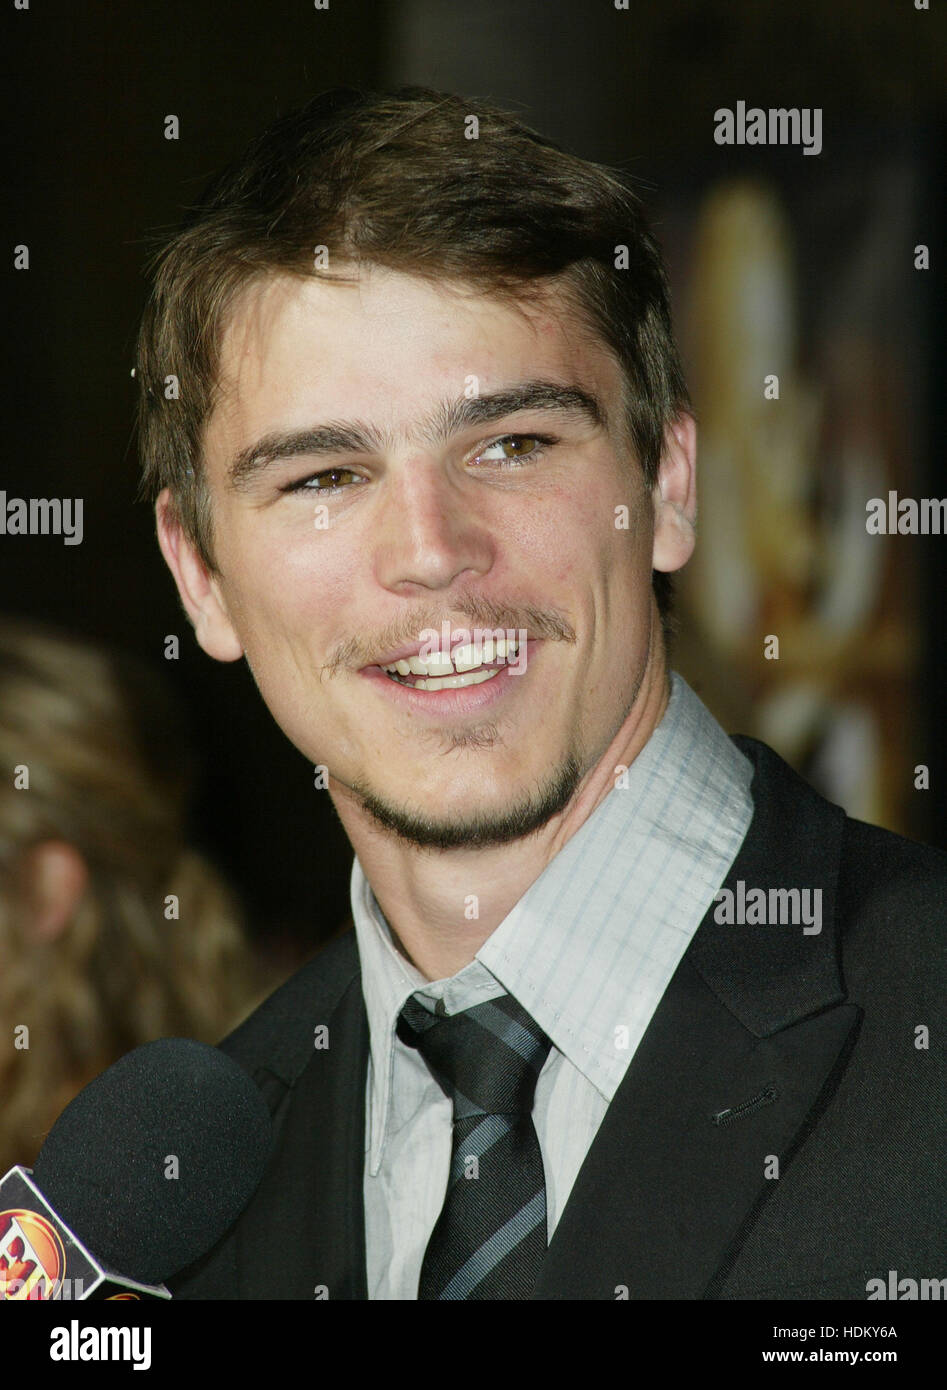 Actor Josh Hartnett poses for photographers at the premiere of the film, 'Wicker Park',  in Los Angeles on August 31, 2004. Hartnett stars in the  MGM film that is based on the motion picture, 'L'Appartement' and  opens in the US on September 3rd. Photo by Francis Specker Stock Photo